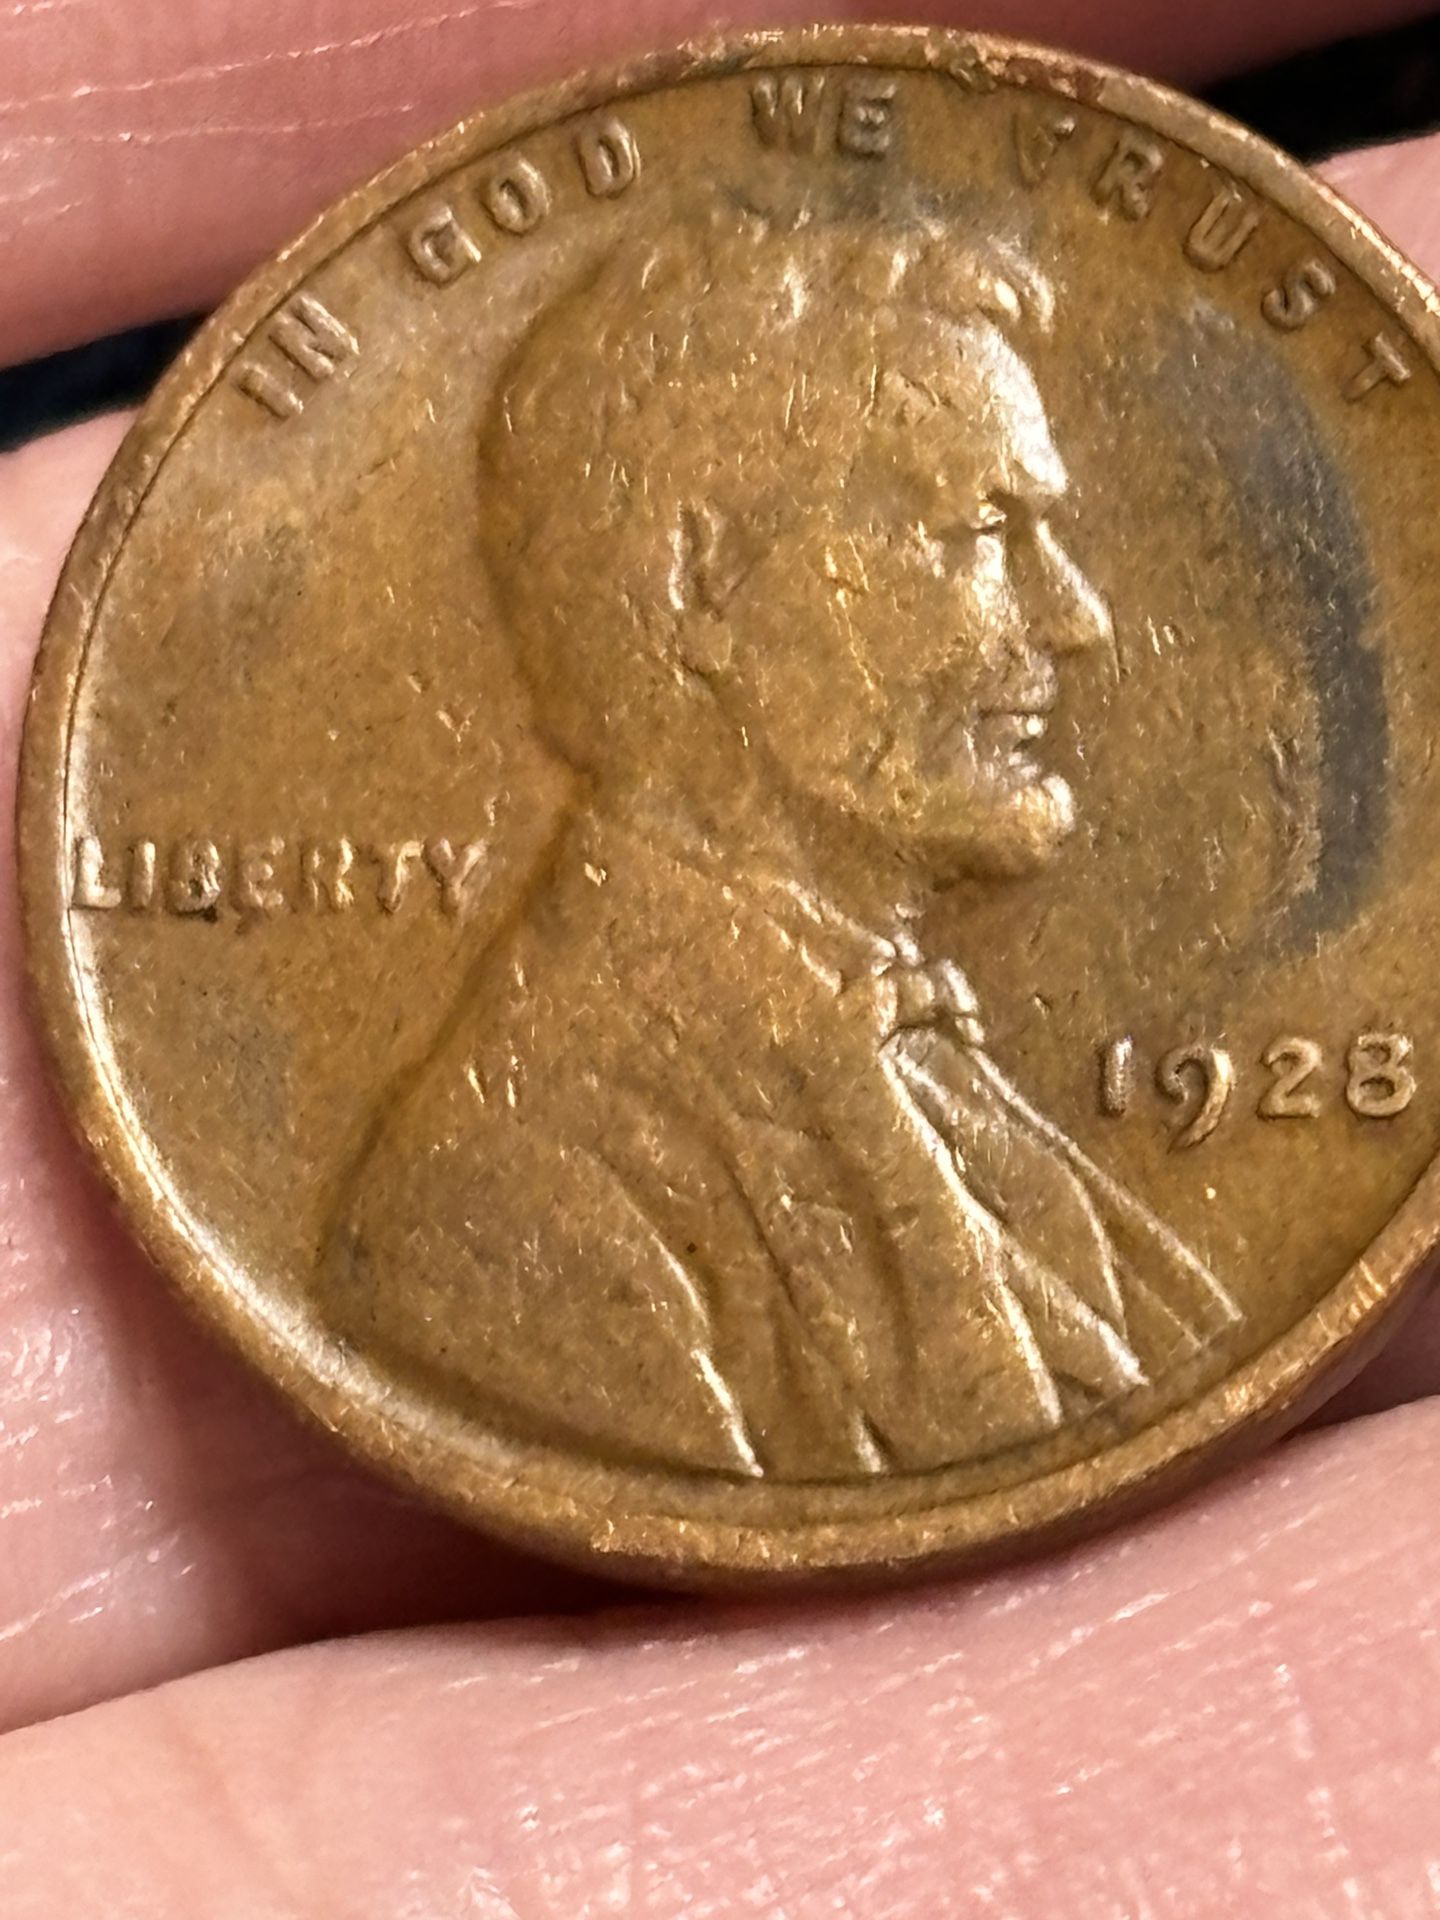 1928 no date wheat penny very hard to find. Please make decent offer.